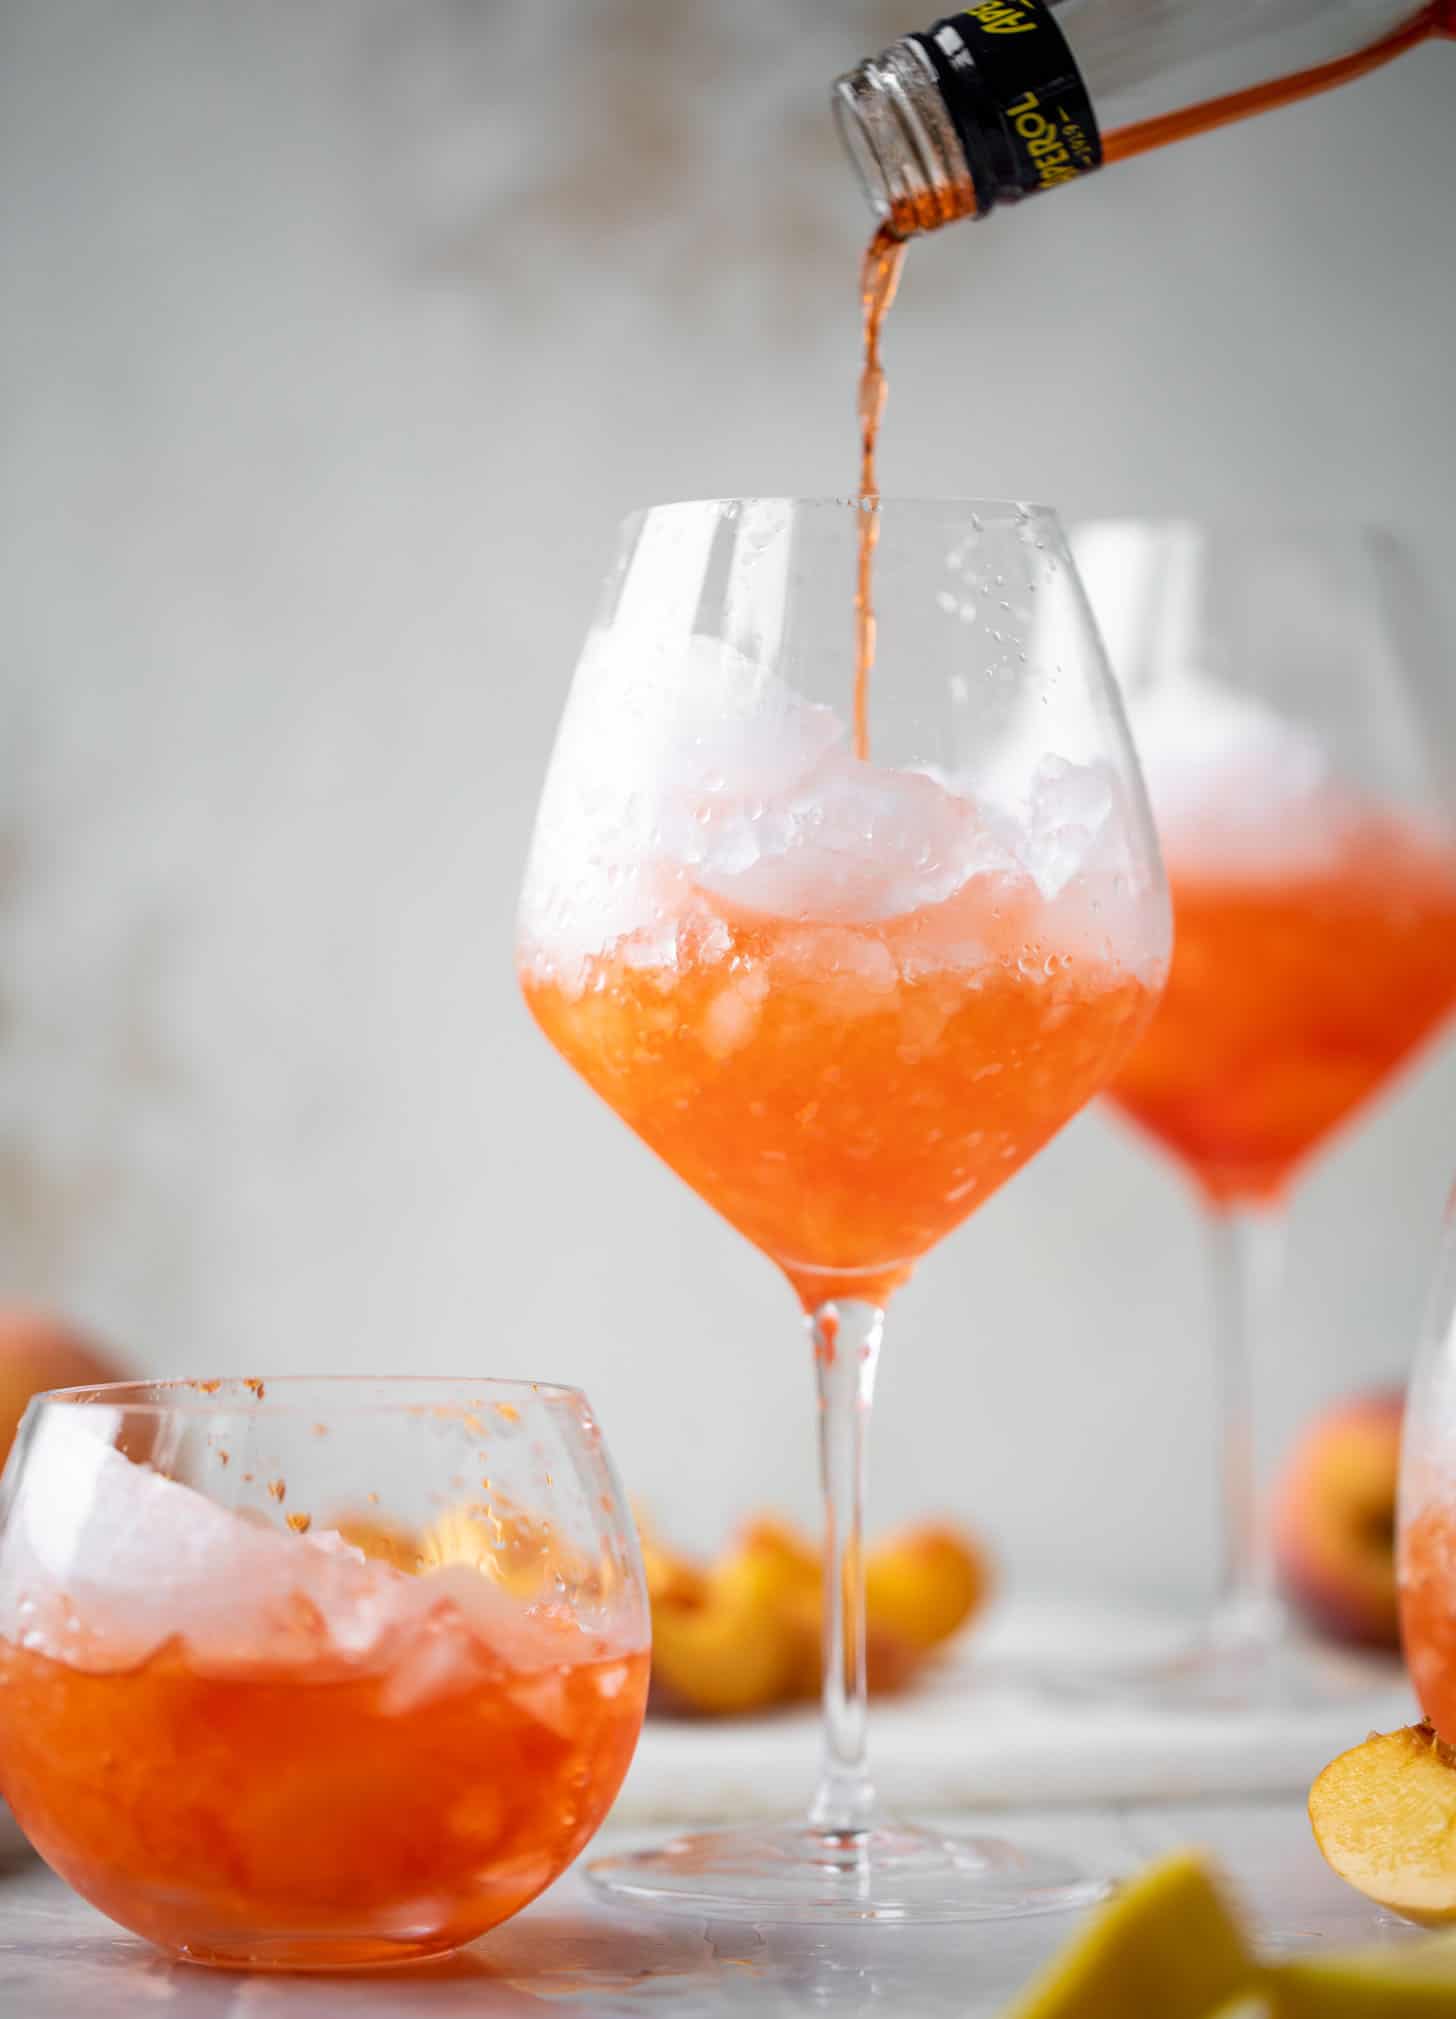 pouring aperol over crushed ice